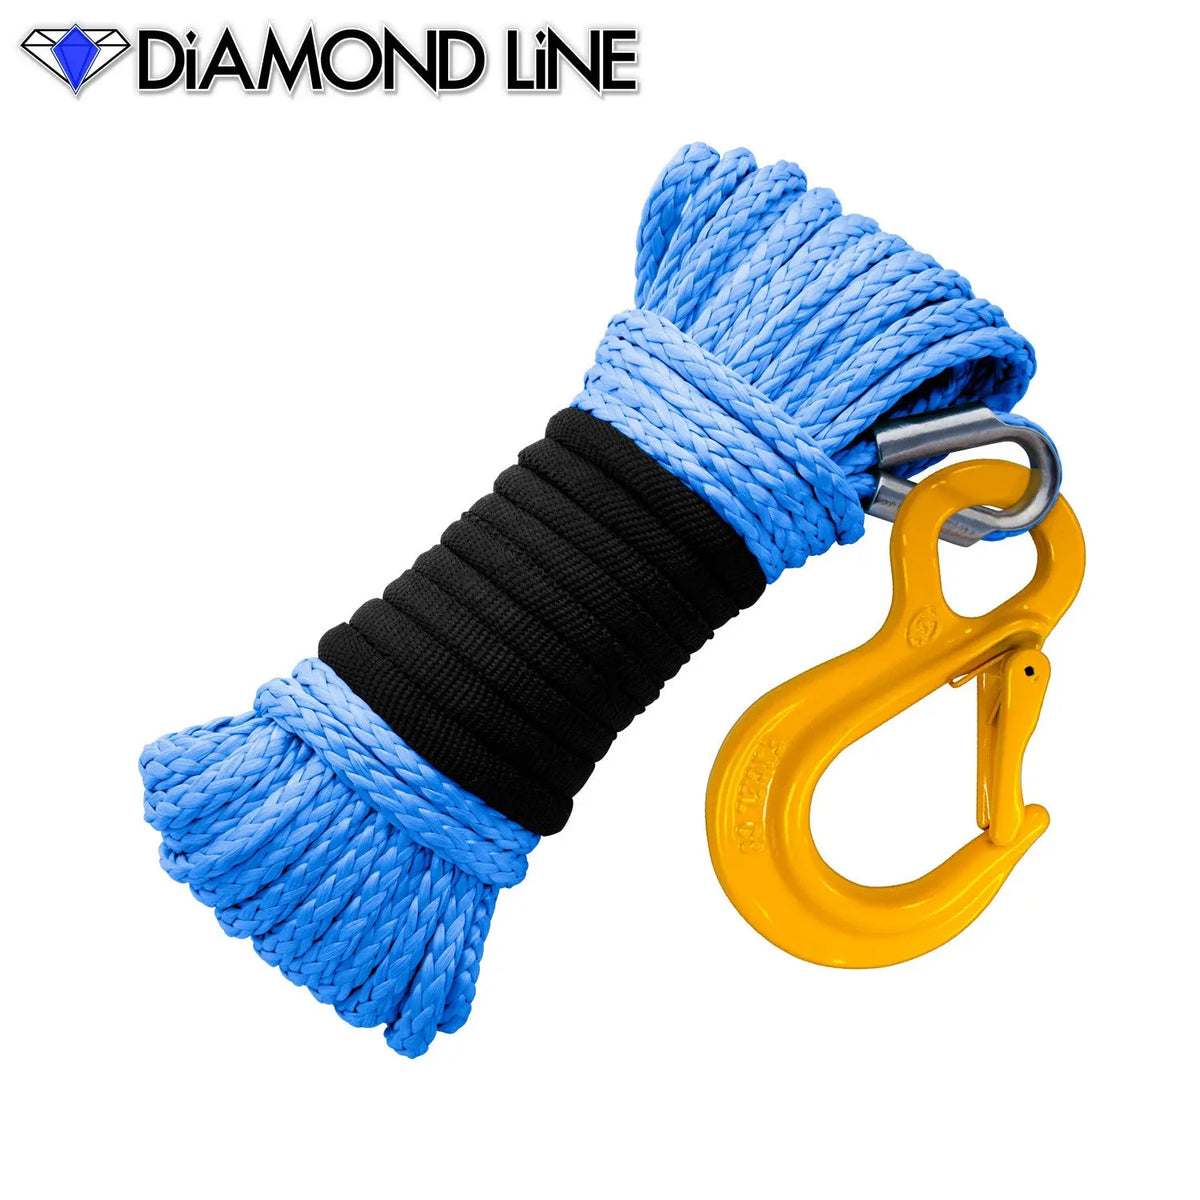 3/16" x 50' Diamond Line Winch Rope Mainline - Blue with Hook